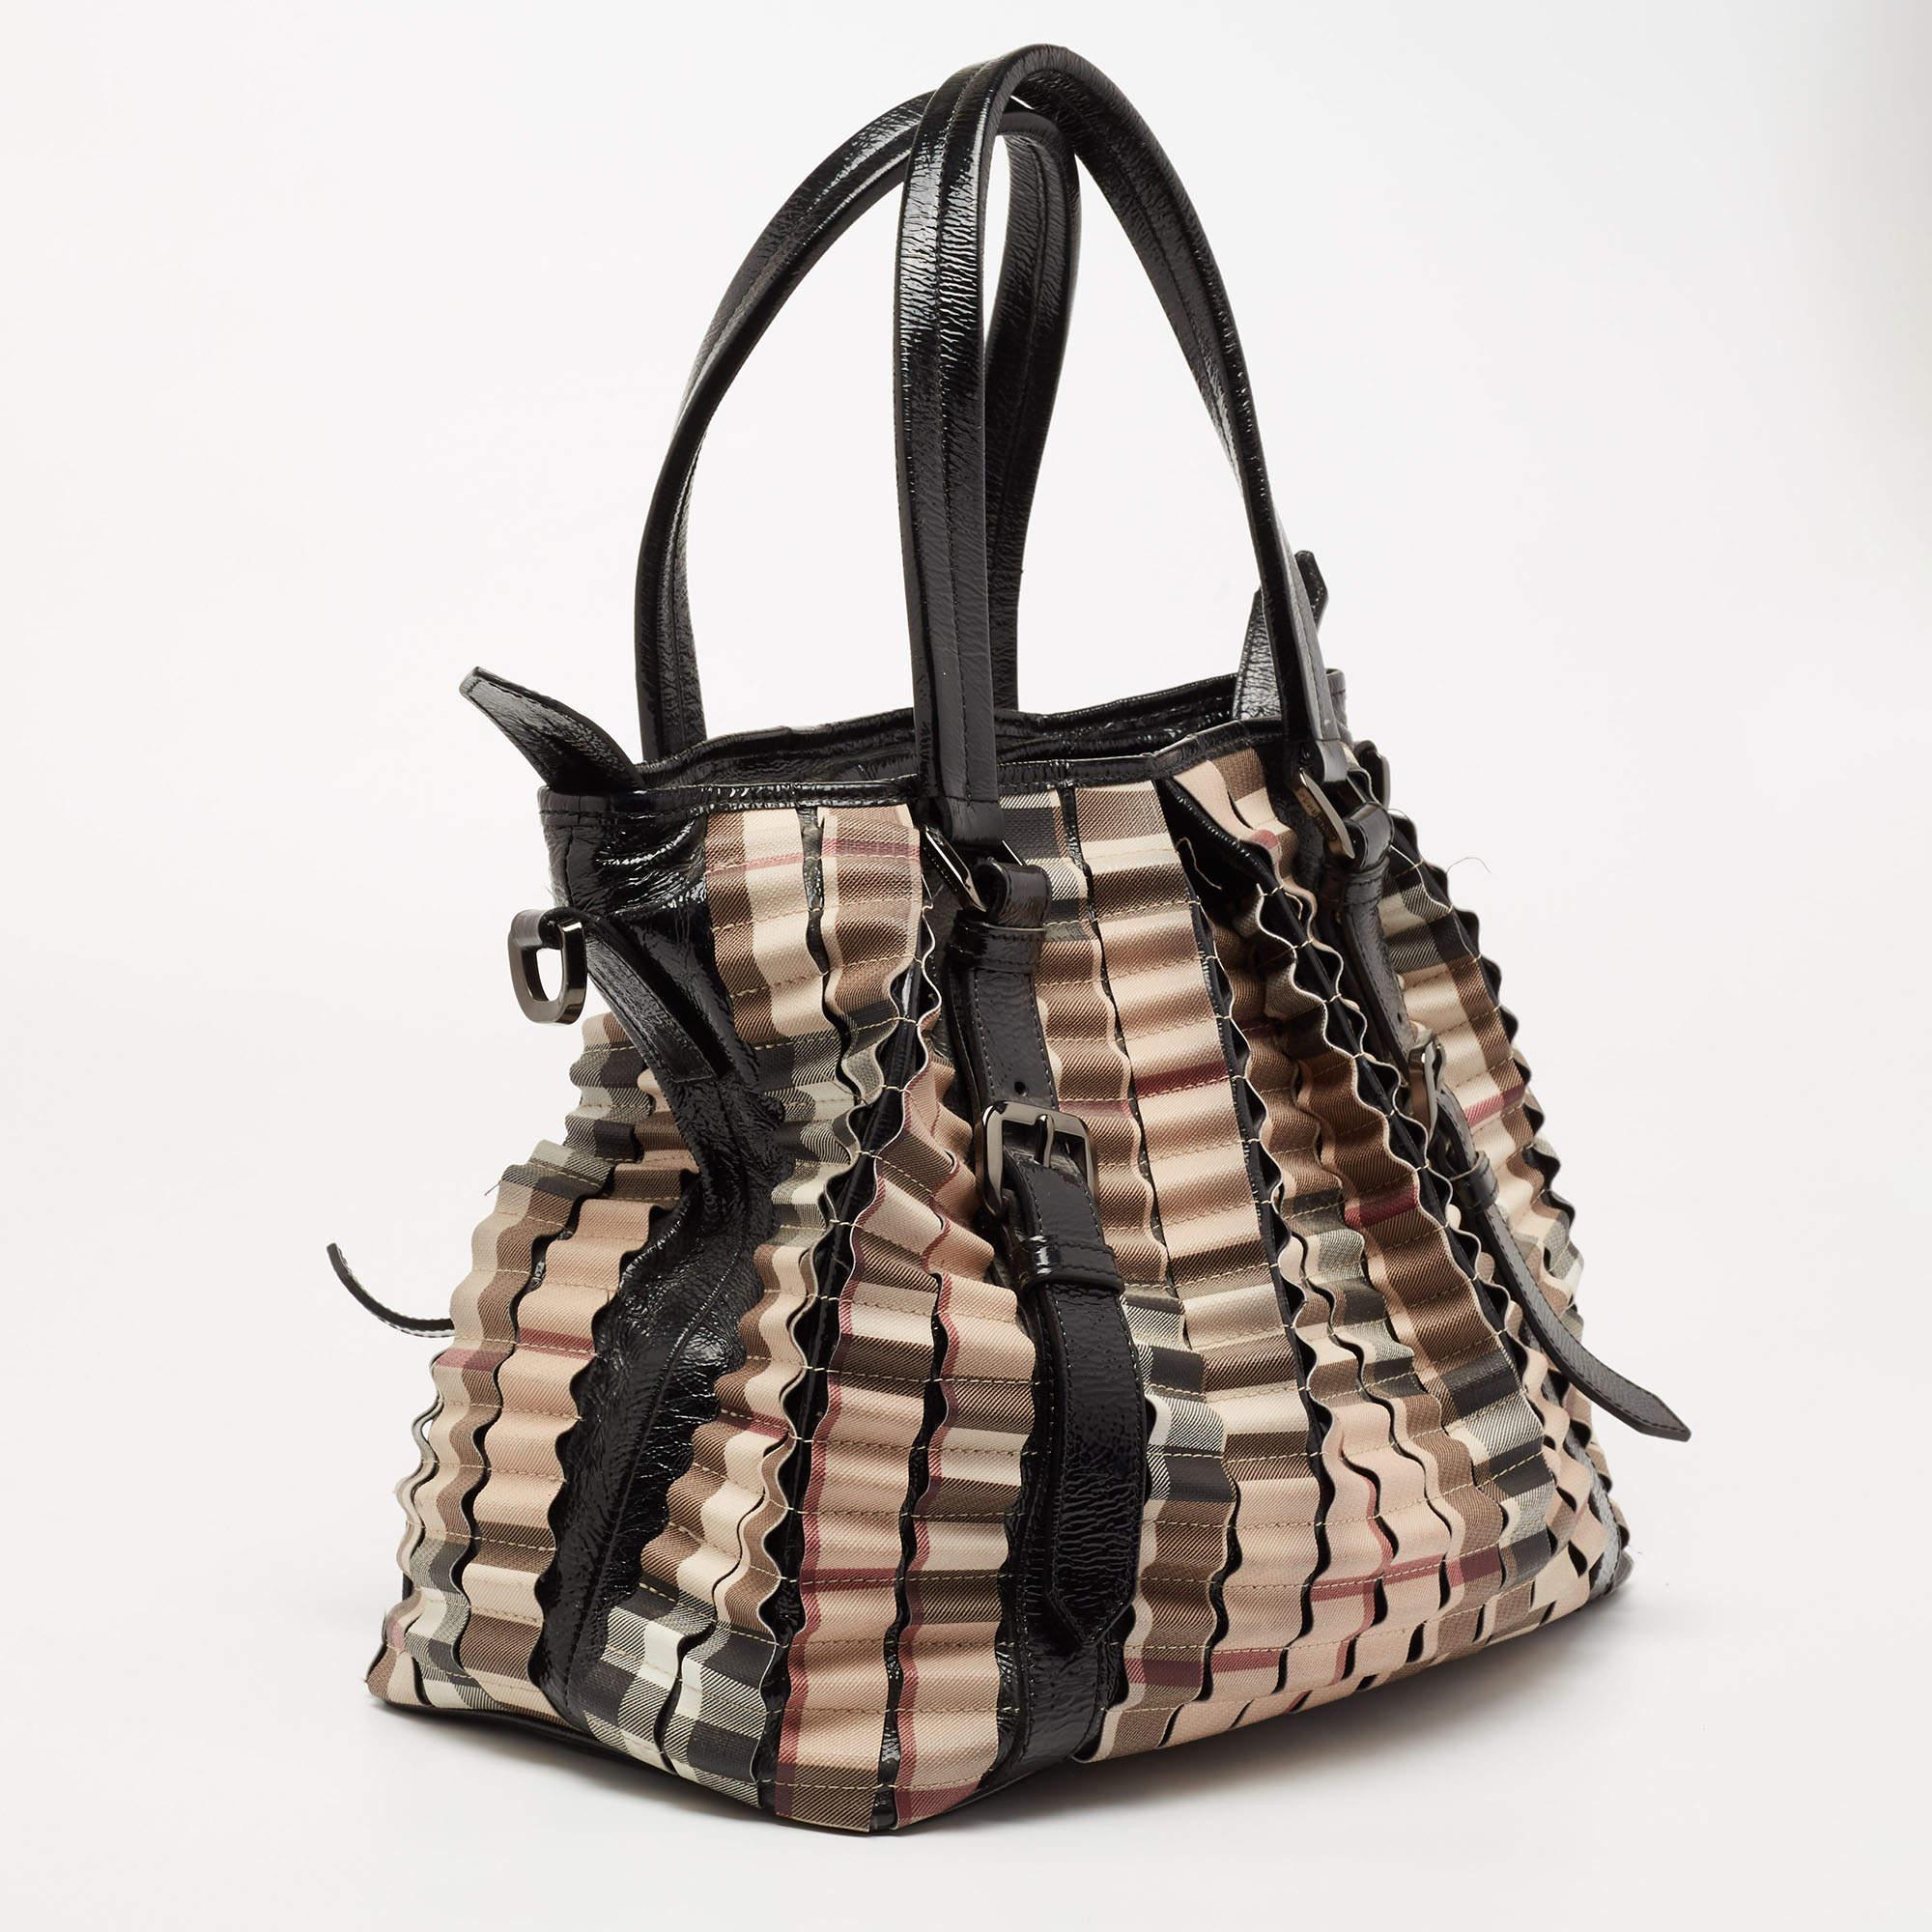 The tote from the house of Burberry features the iconic House Check PVC as pleats running all over the bag. Held by two handles and equipped with a spacious fabric interior, the bag is a great option to carry for work, shopping, or travel.

